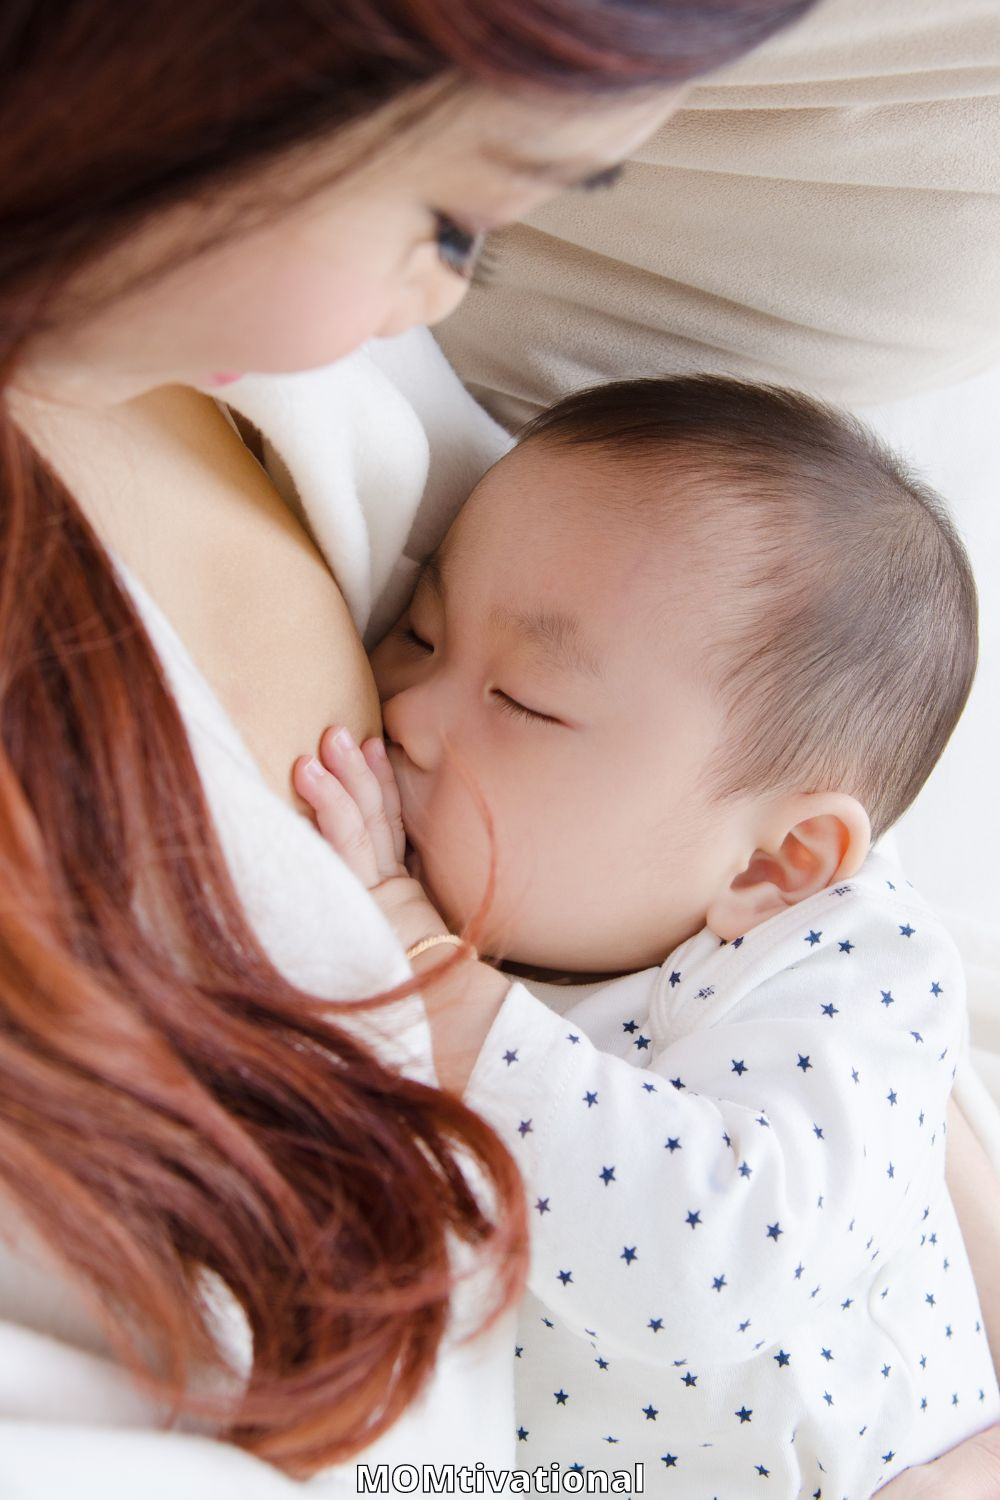 Baby breastfeeding - - Featured in : Breastfeeding Tips For New Moms